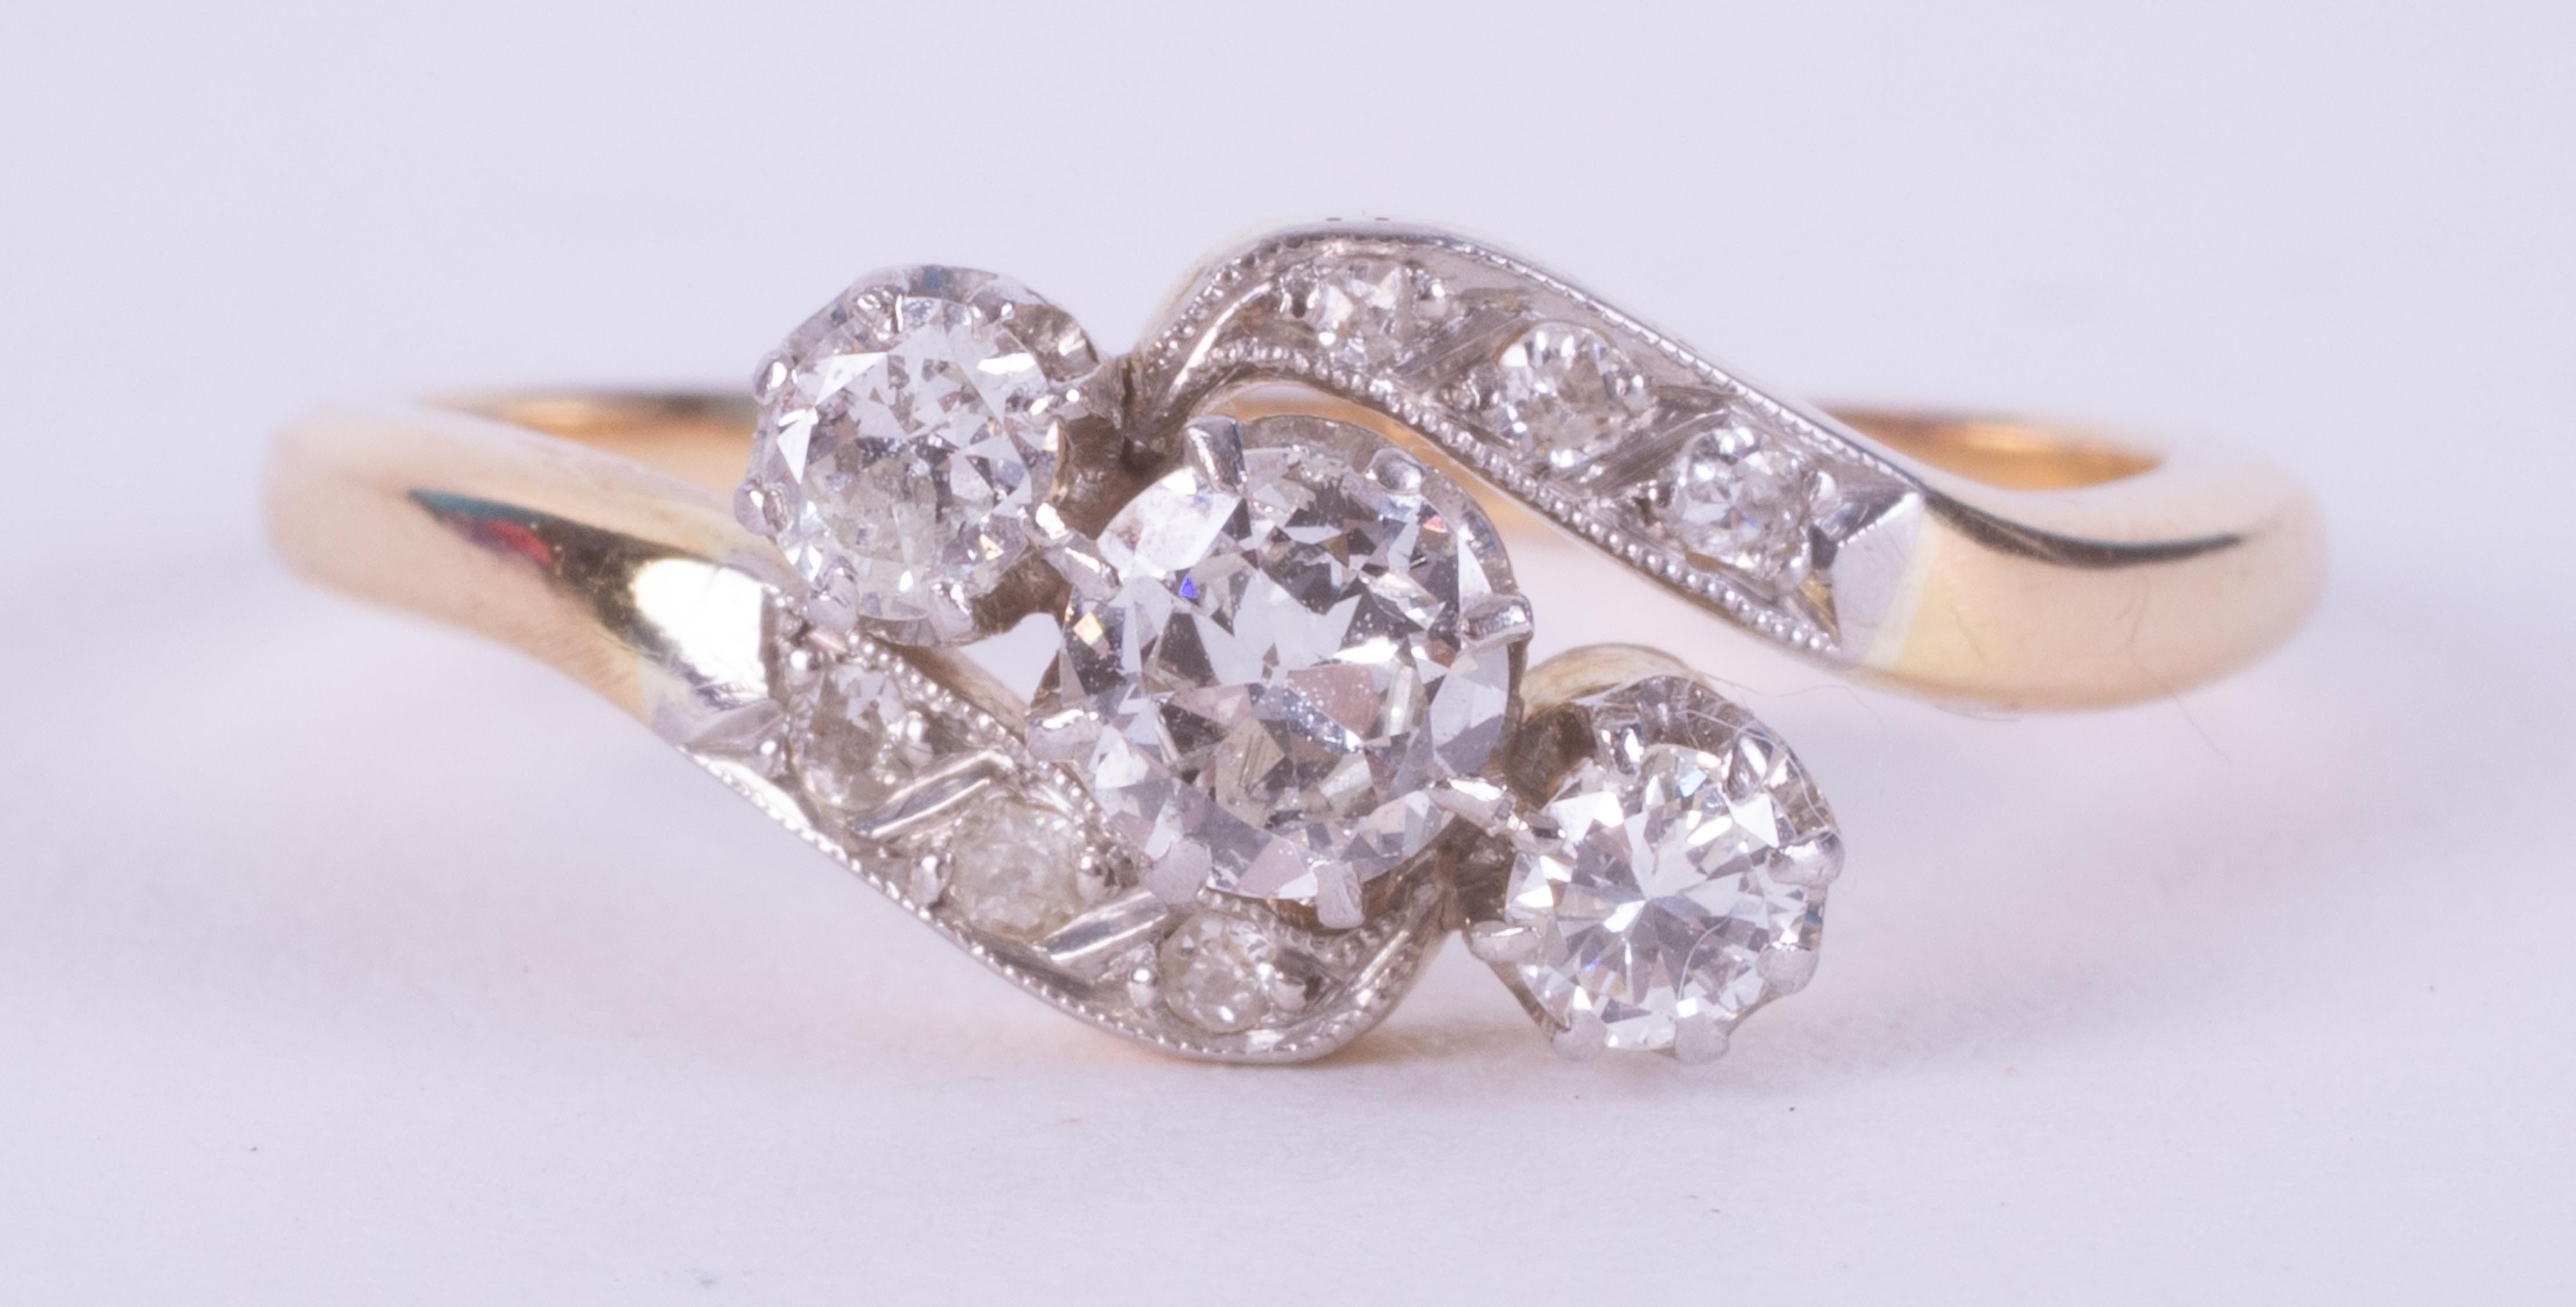 An 18ct yellow gold & platinum crossover style ring set with three round brilliant cut diamonds